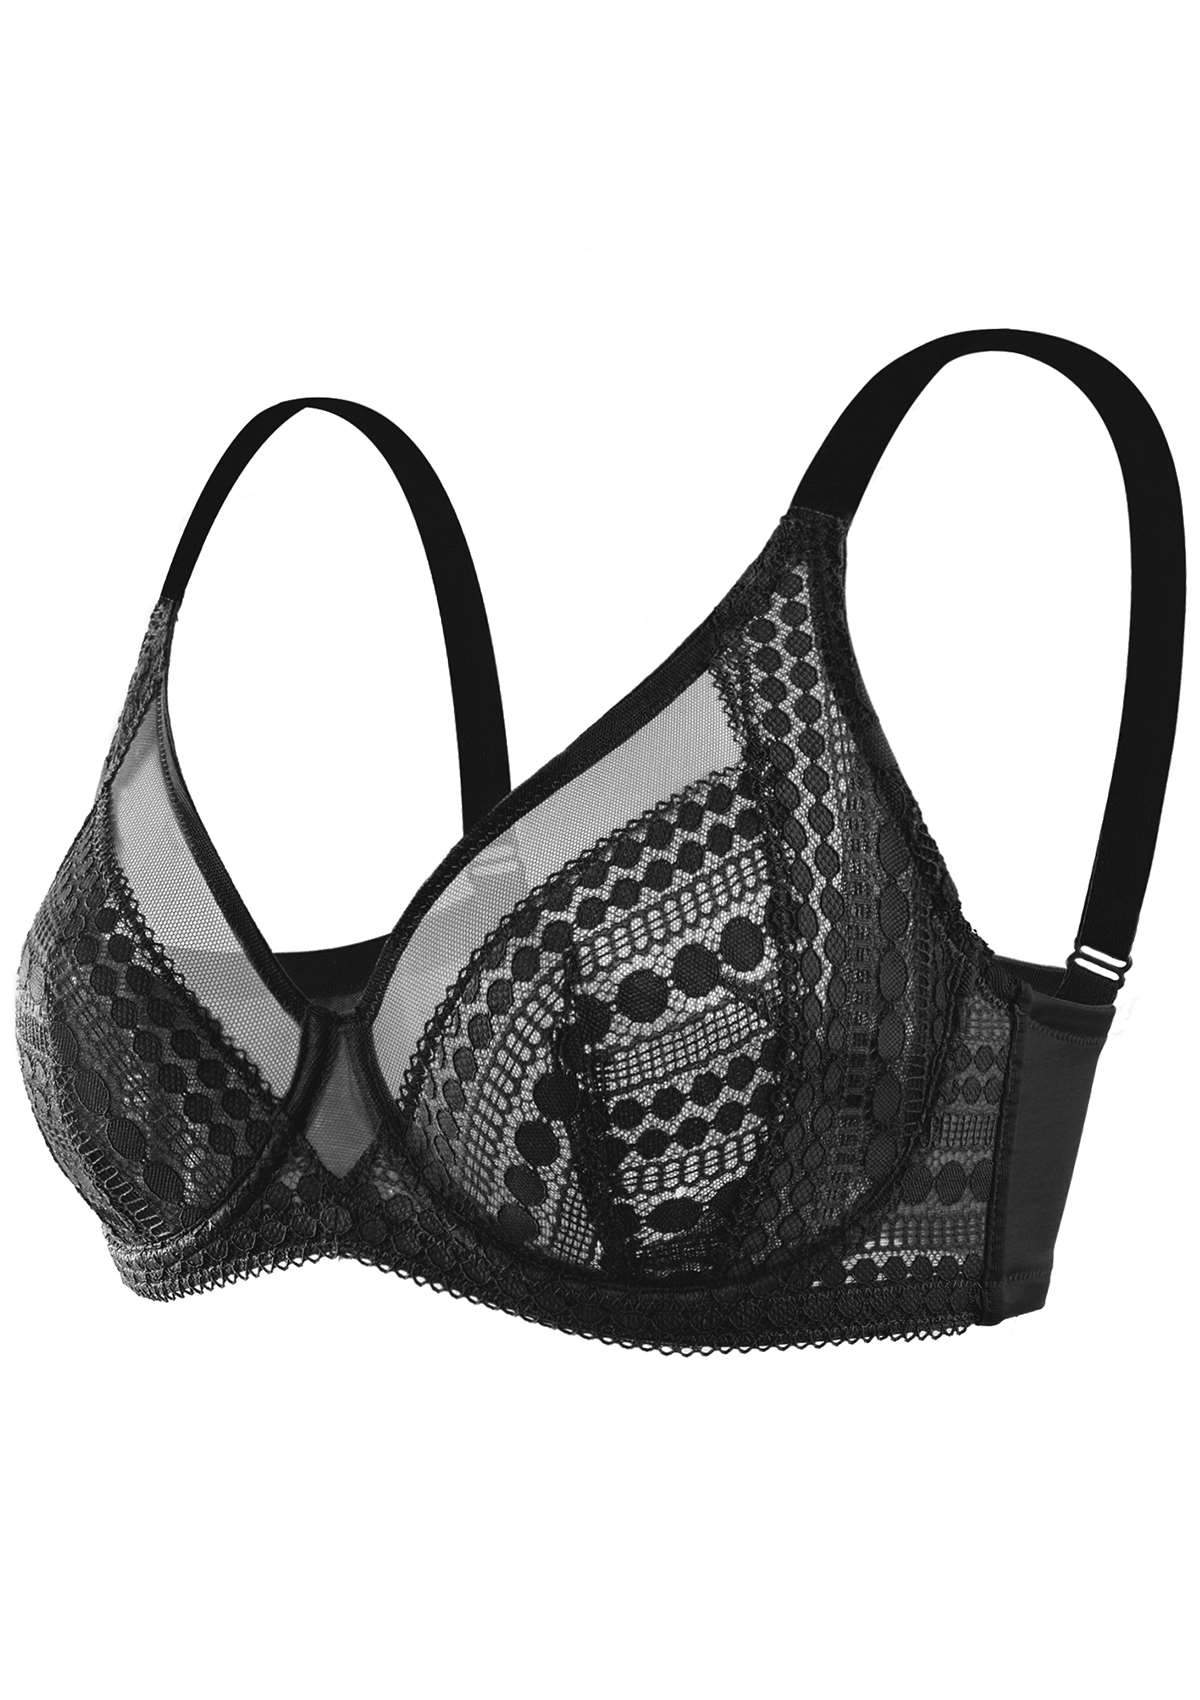 HSIA Heroine Matching Bra And Panties: Unlined Lace Unpadded Bra - Black / 34 / D